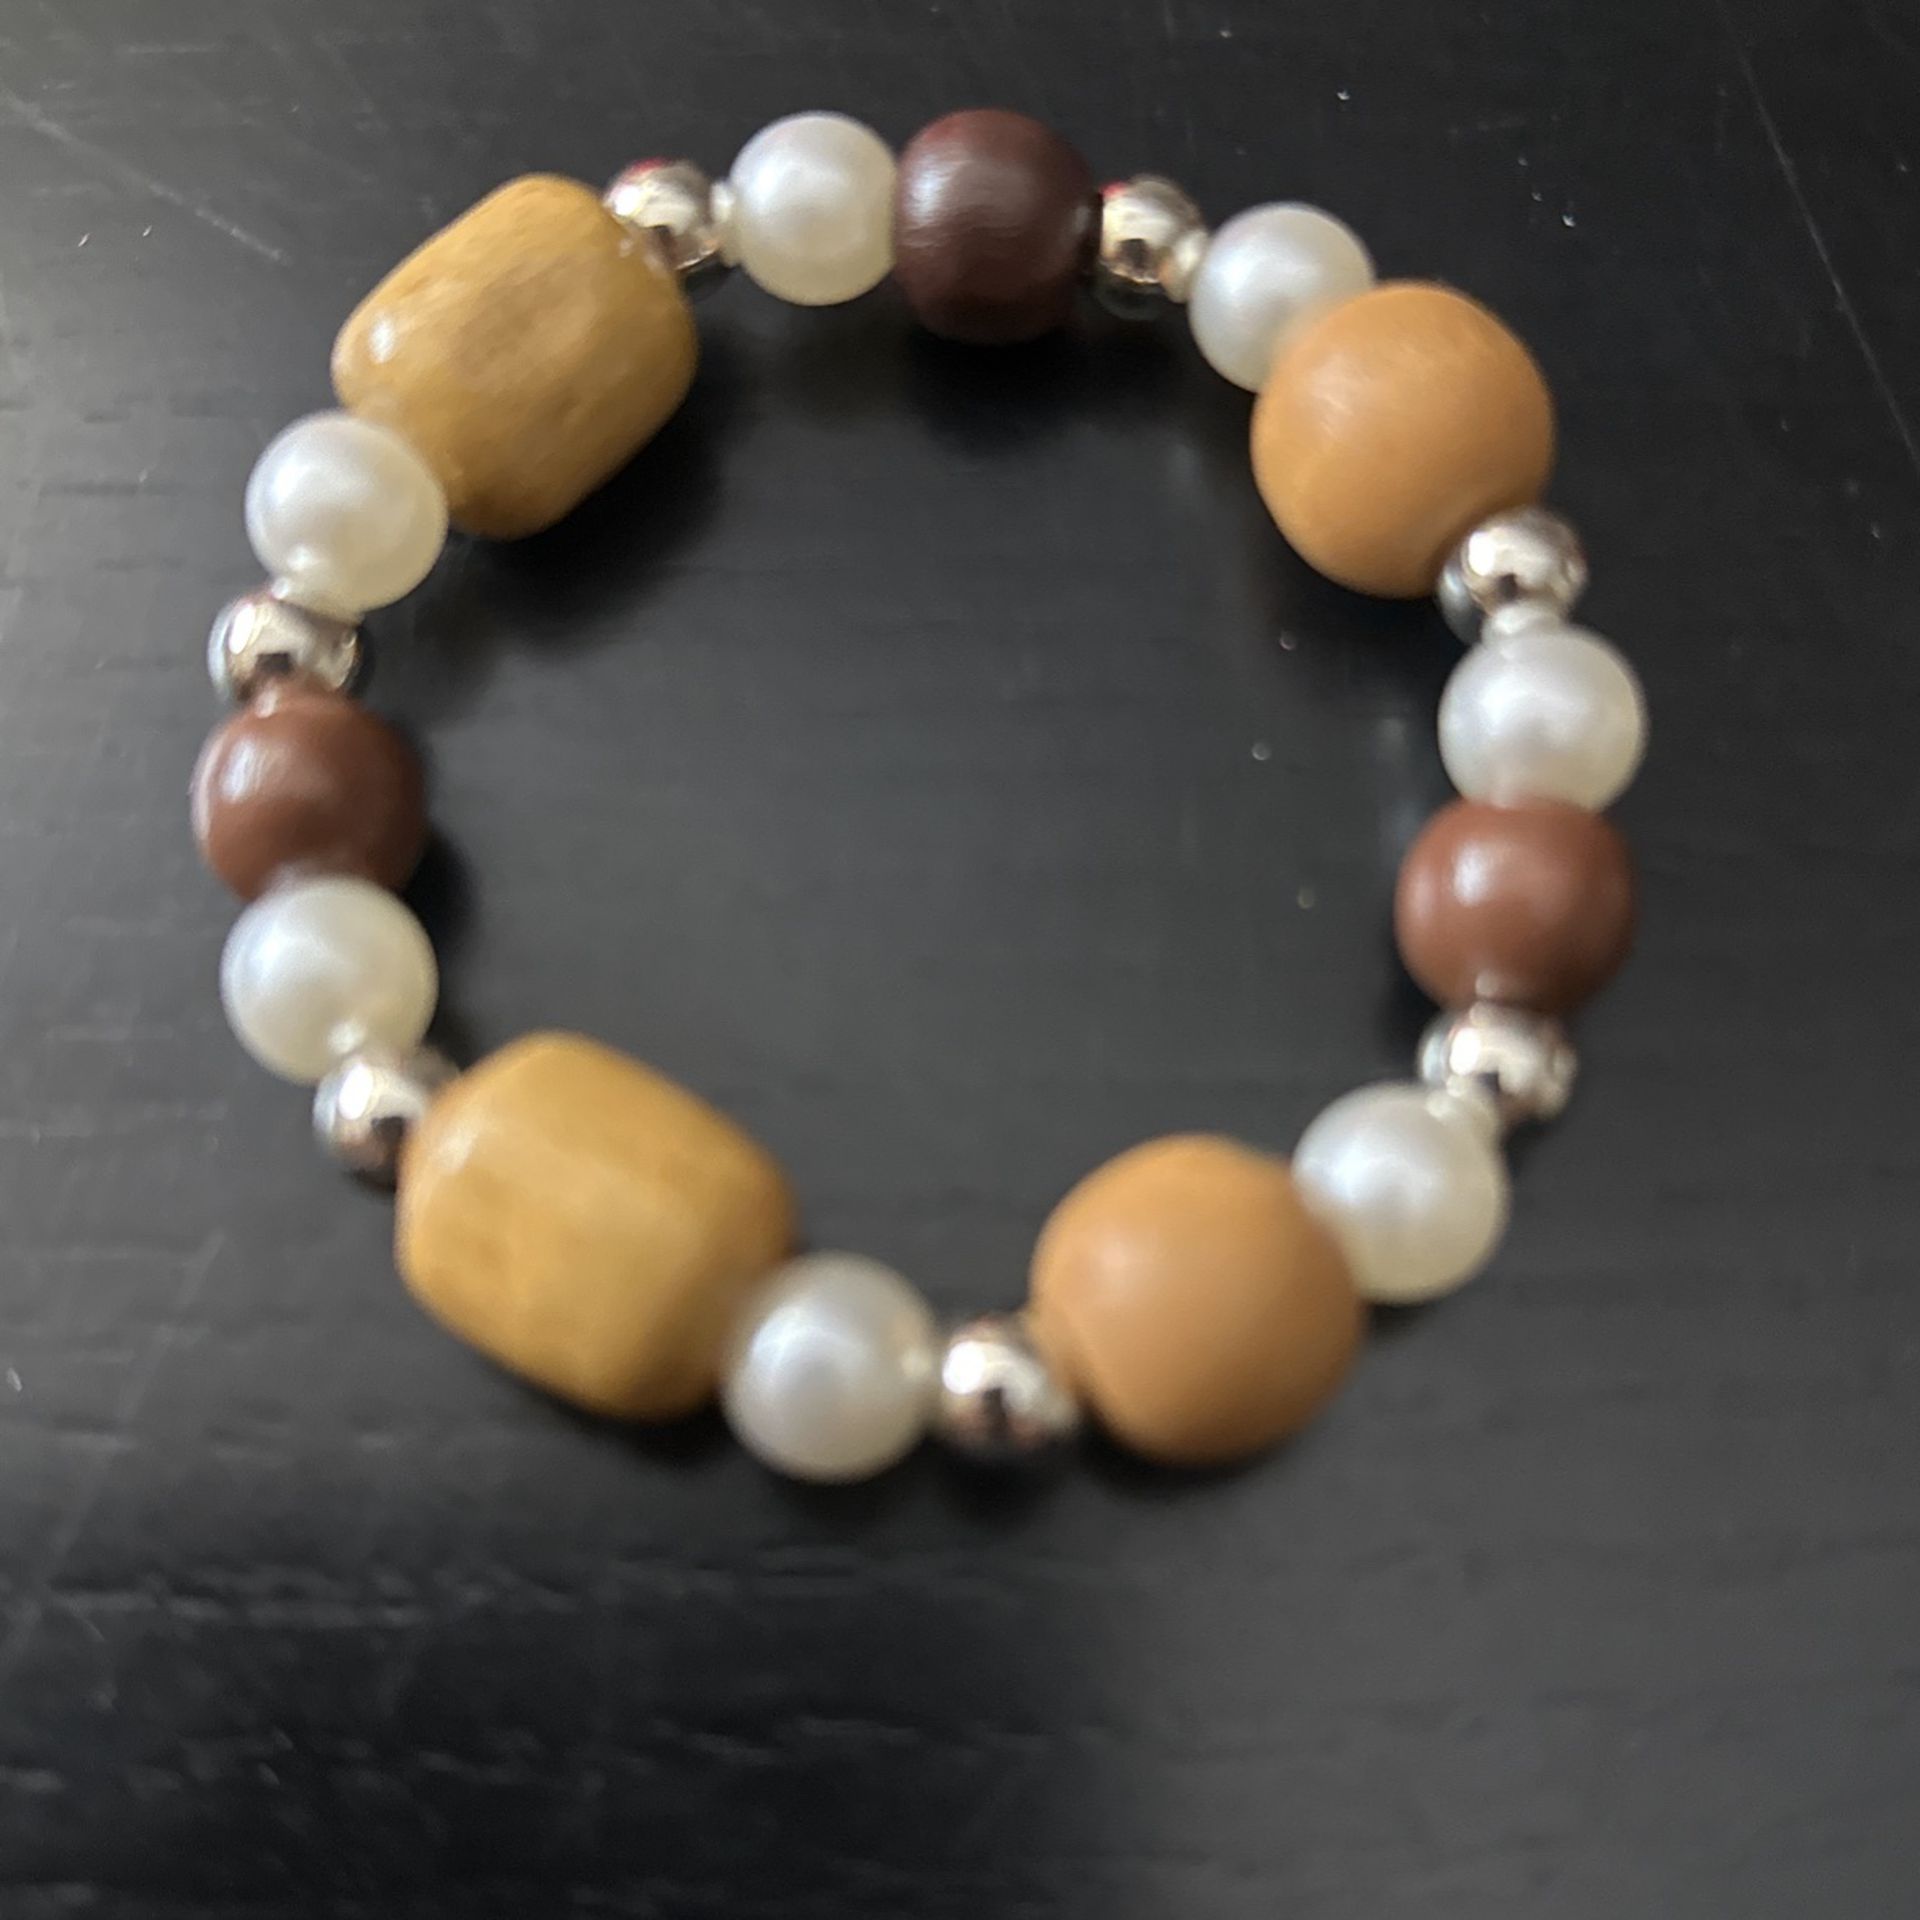 Light And Dark Wood Bead With Silver And Pearl Bead Bracelet